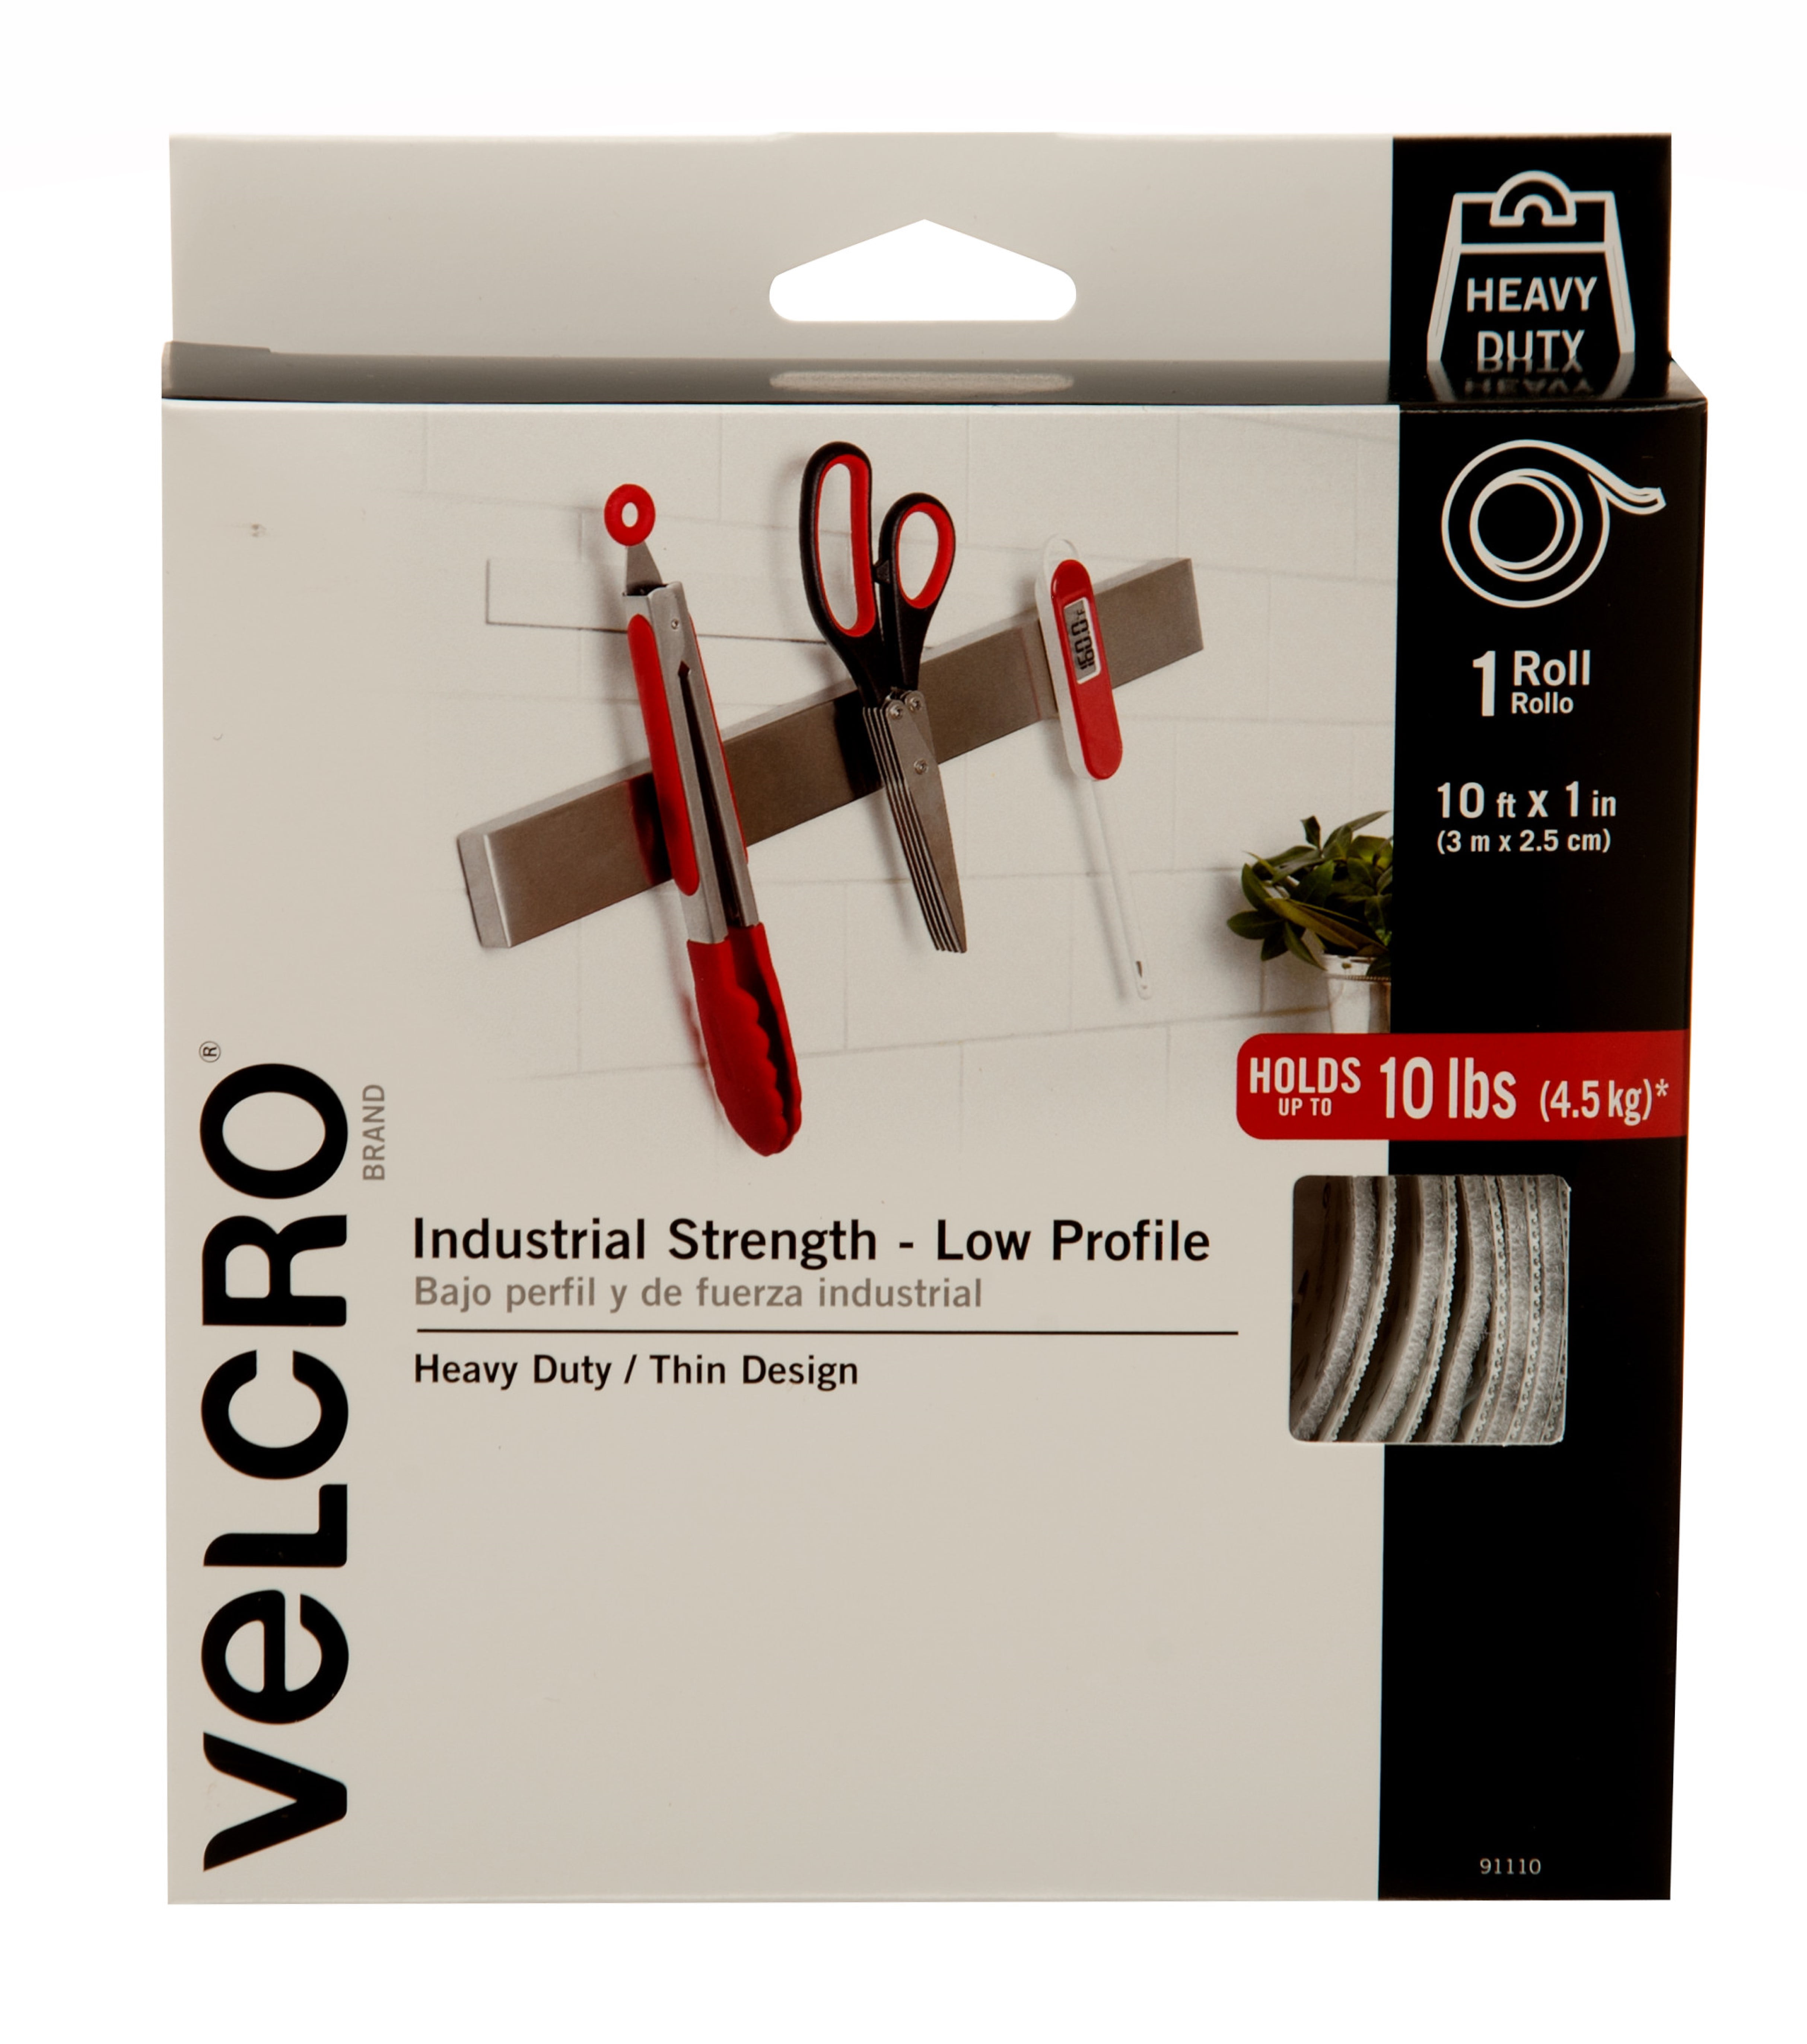 VELCRO Brand 120-in Extreme Outdoor 10Ft X 1In Roll Titanium